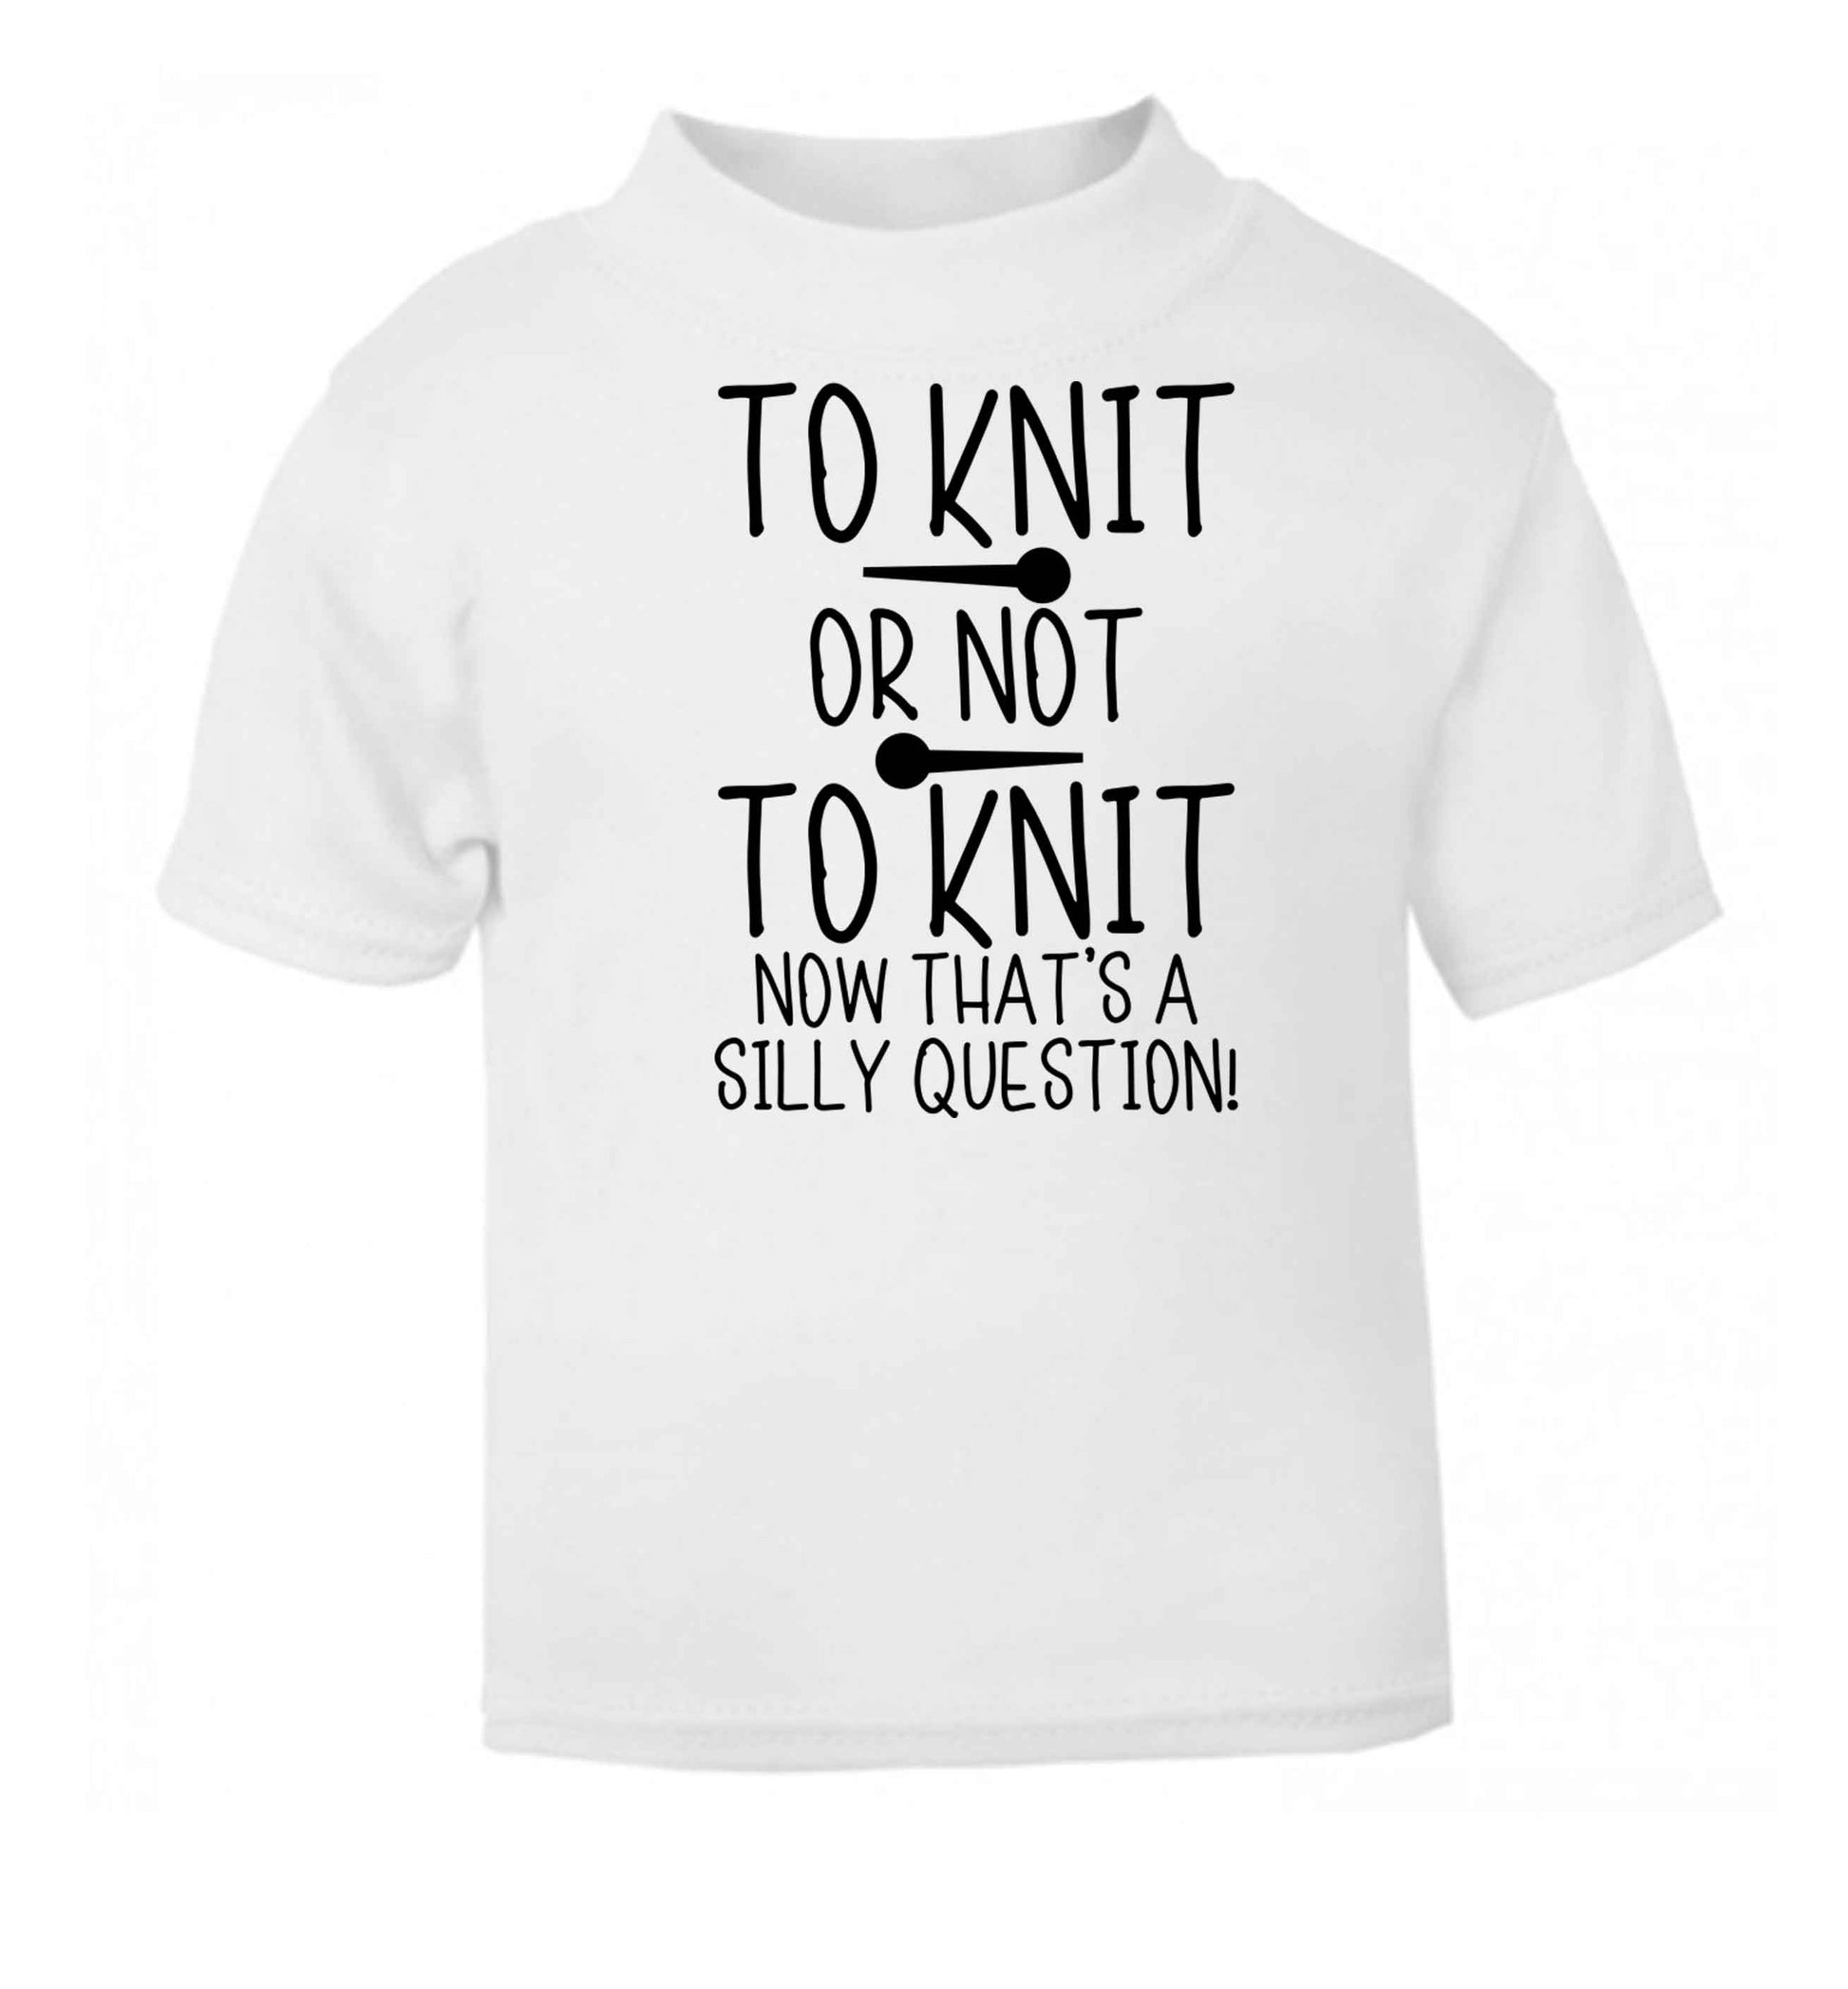 To knit or not to knit now that's a silly question white baby toddler Tshirt 2 Years